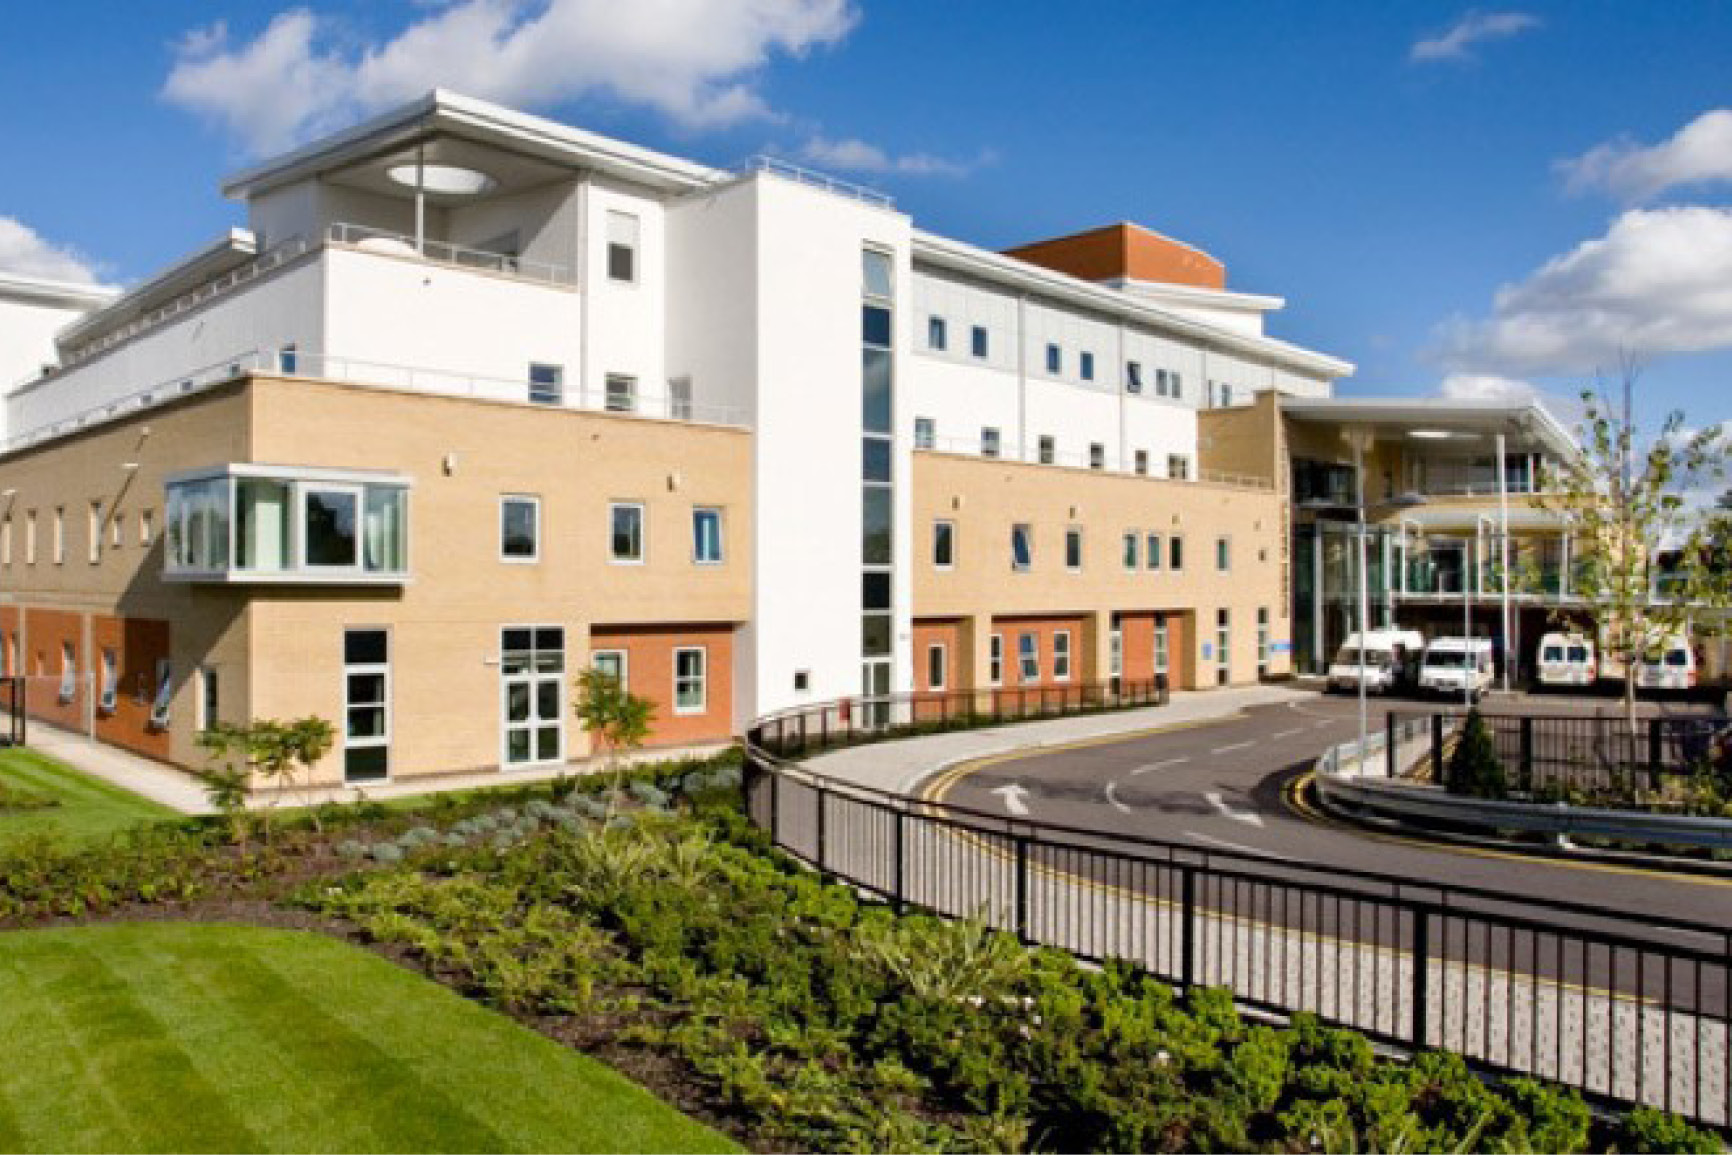 Tecs - Comprehensive building compliance services - Case Study - Queen Mary's Hospital